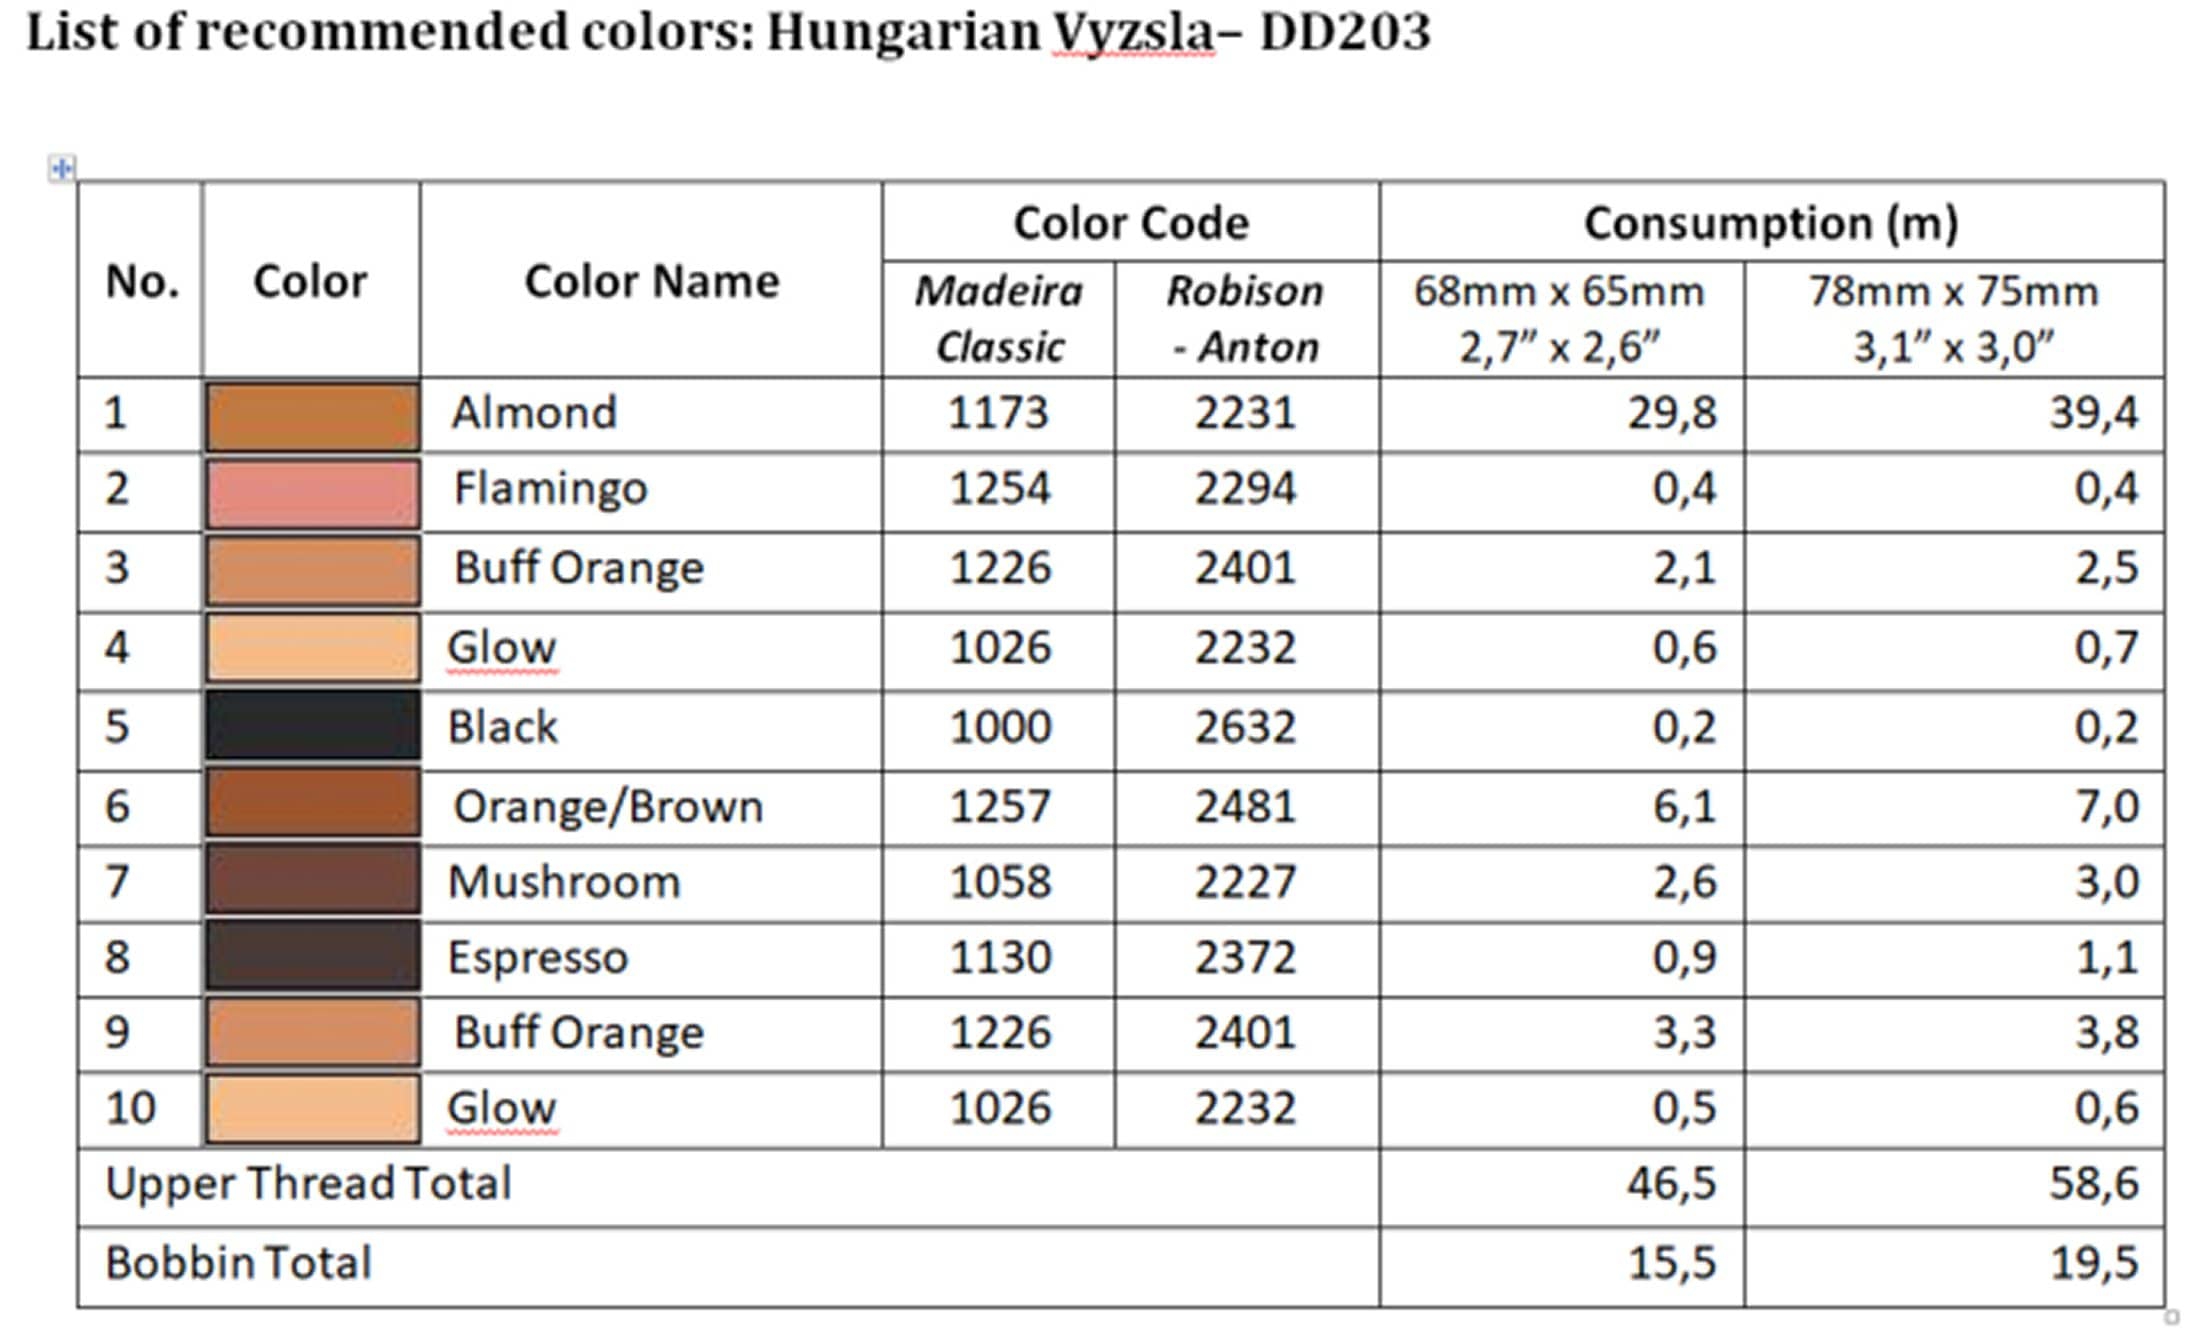 List of recommended colors - DD203